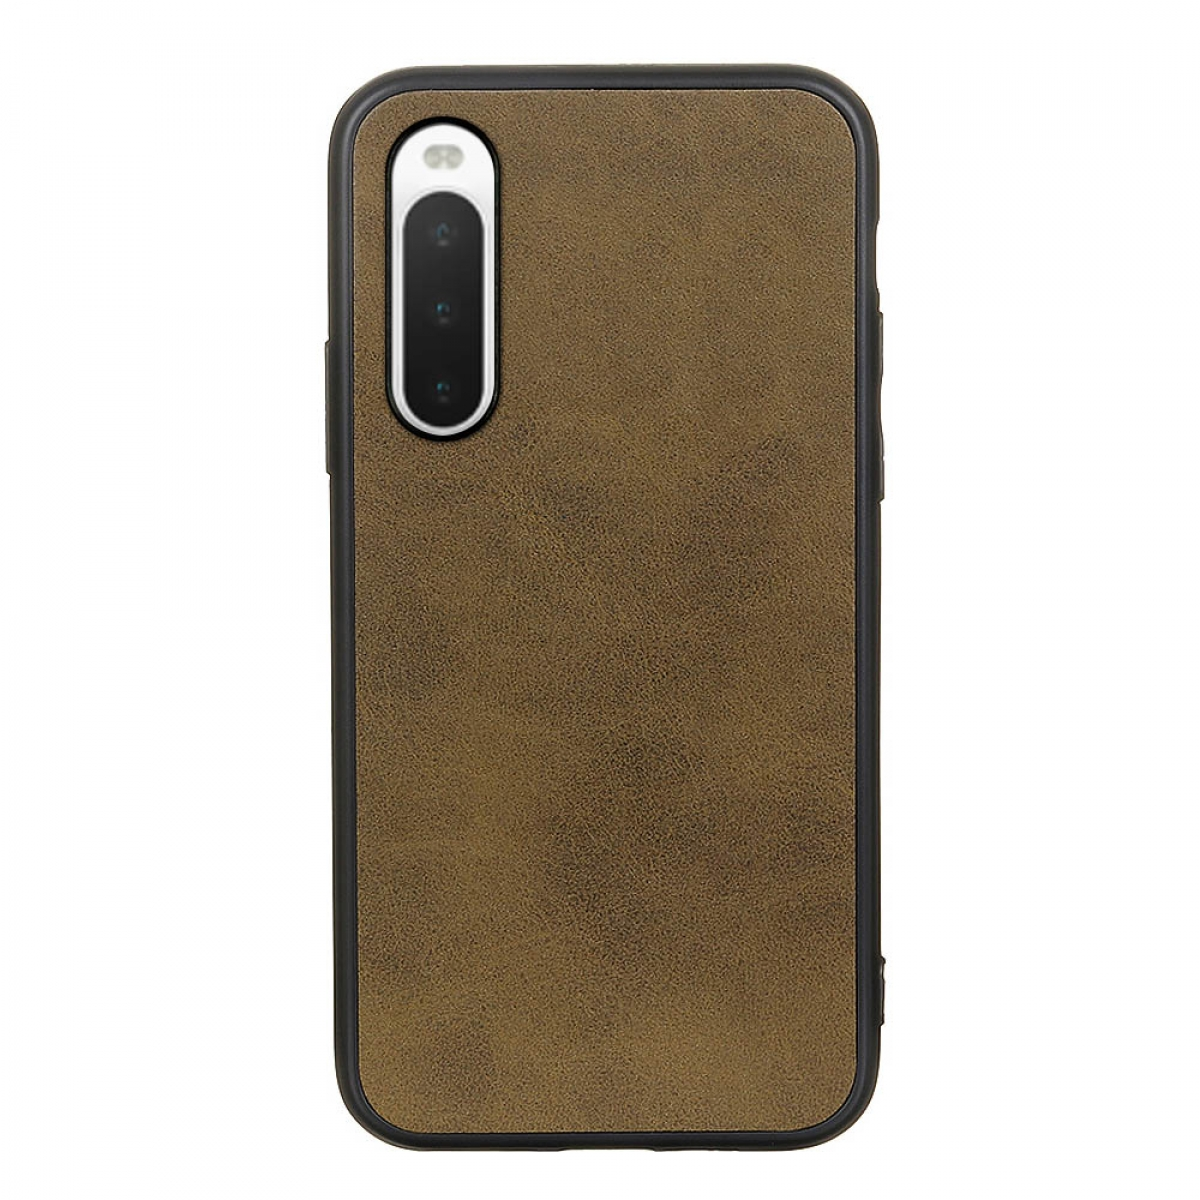 IV, Olive Xperia CASEONLINE Backcover, Business, 5 Sony,